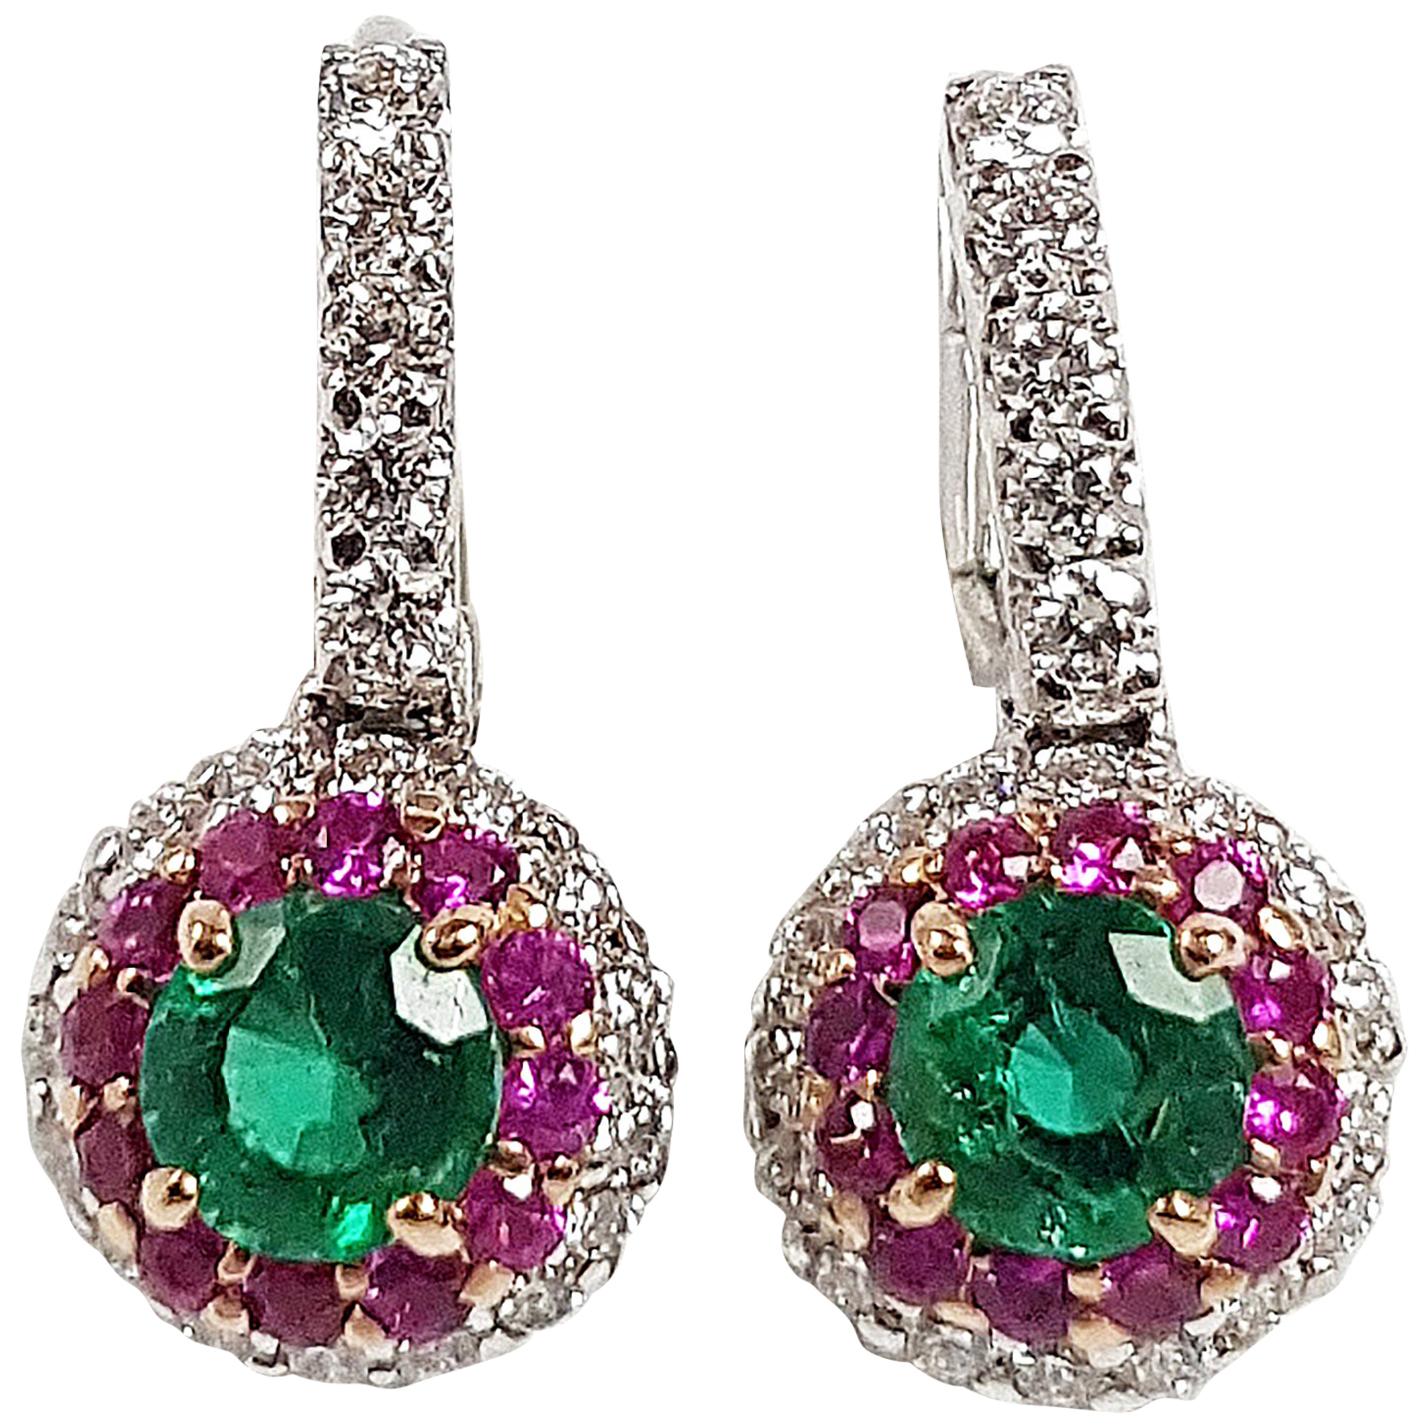 Emerald with Diamond and Pink Sapphire Earrings Set in 18 Karat White Gold